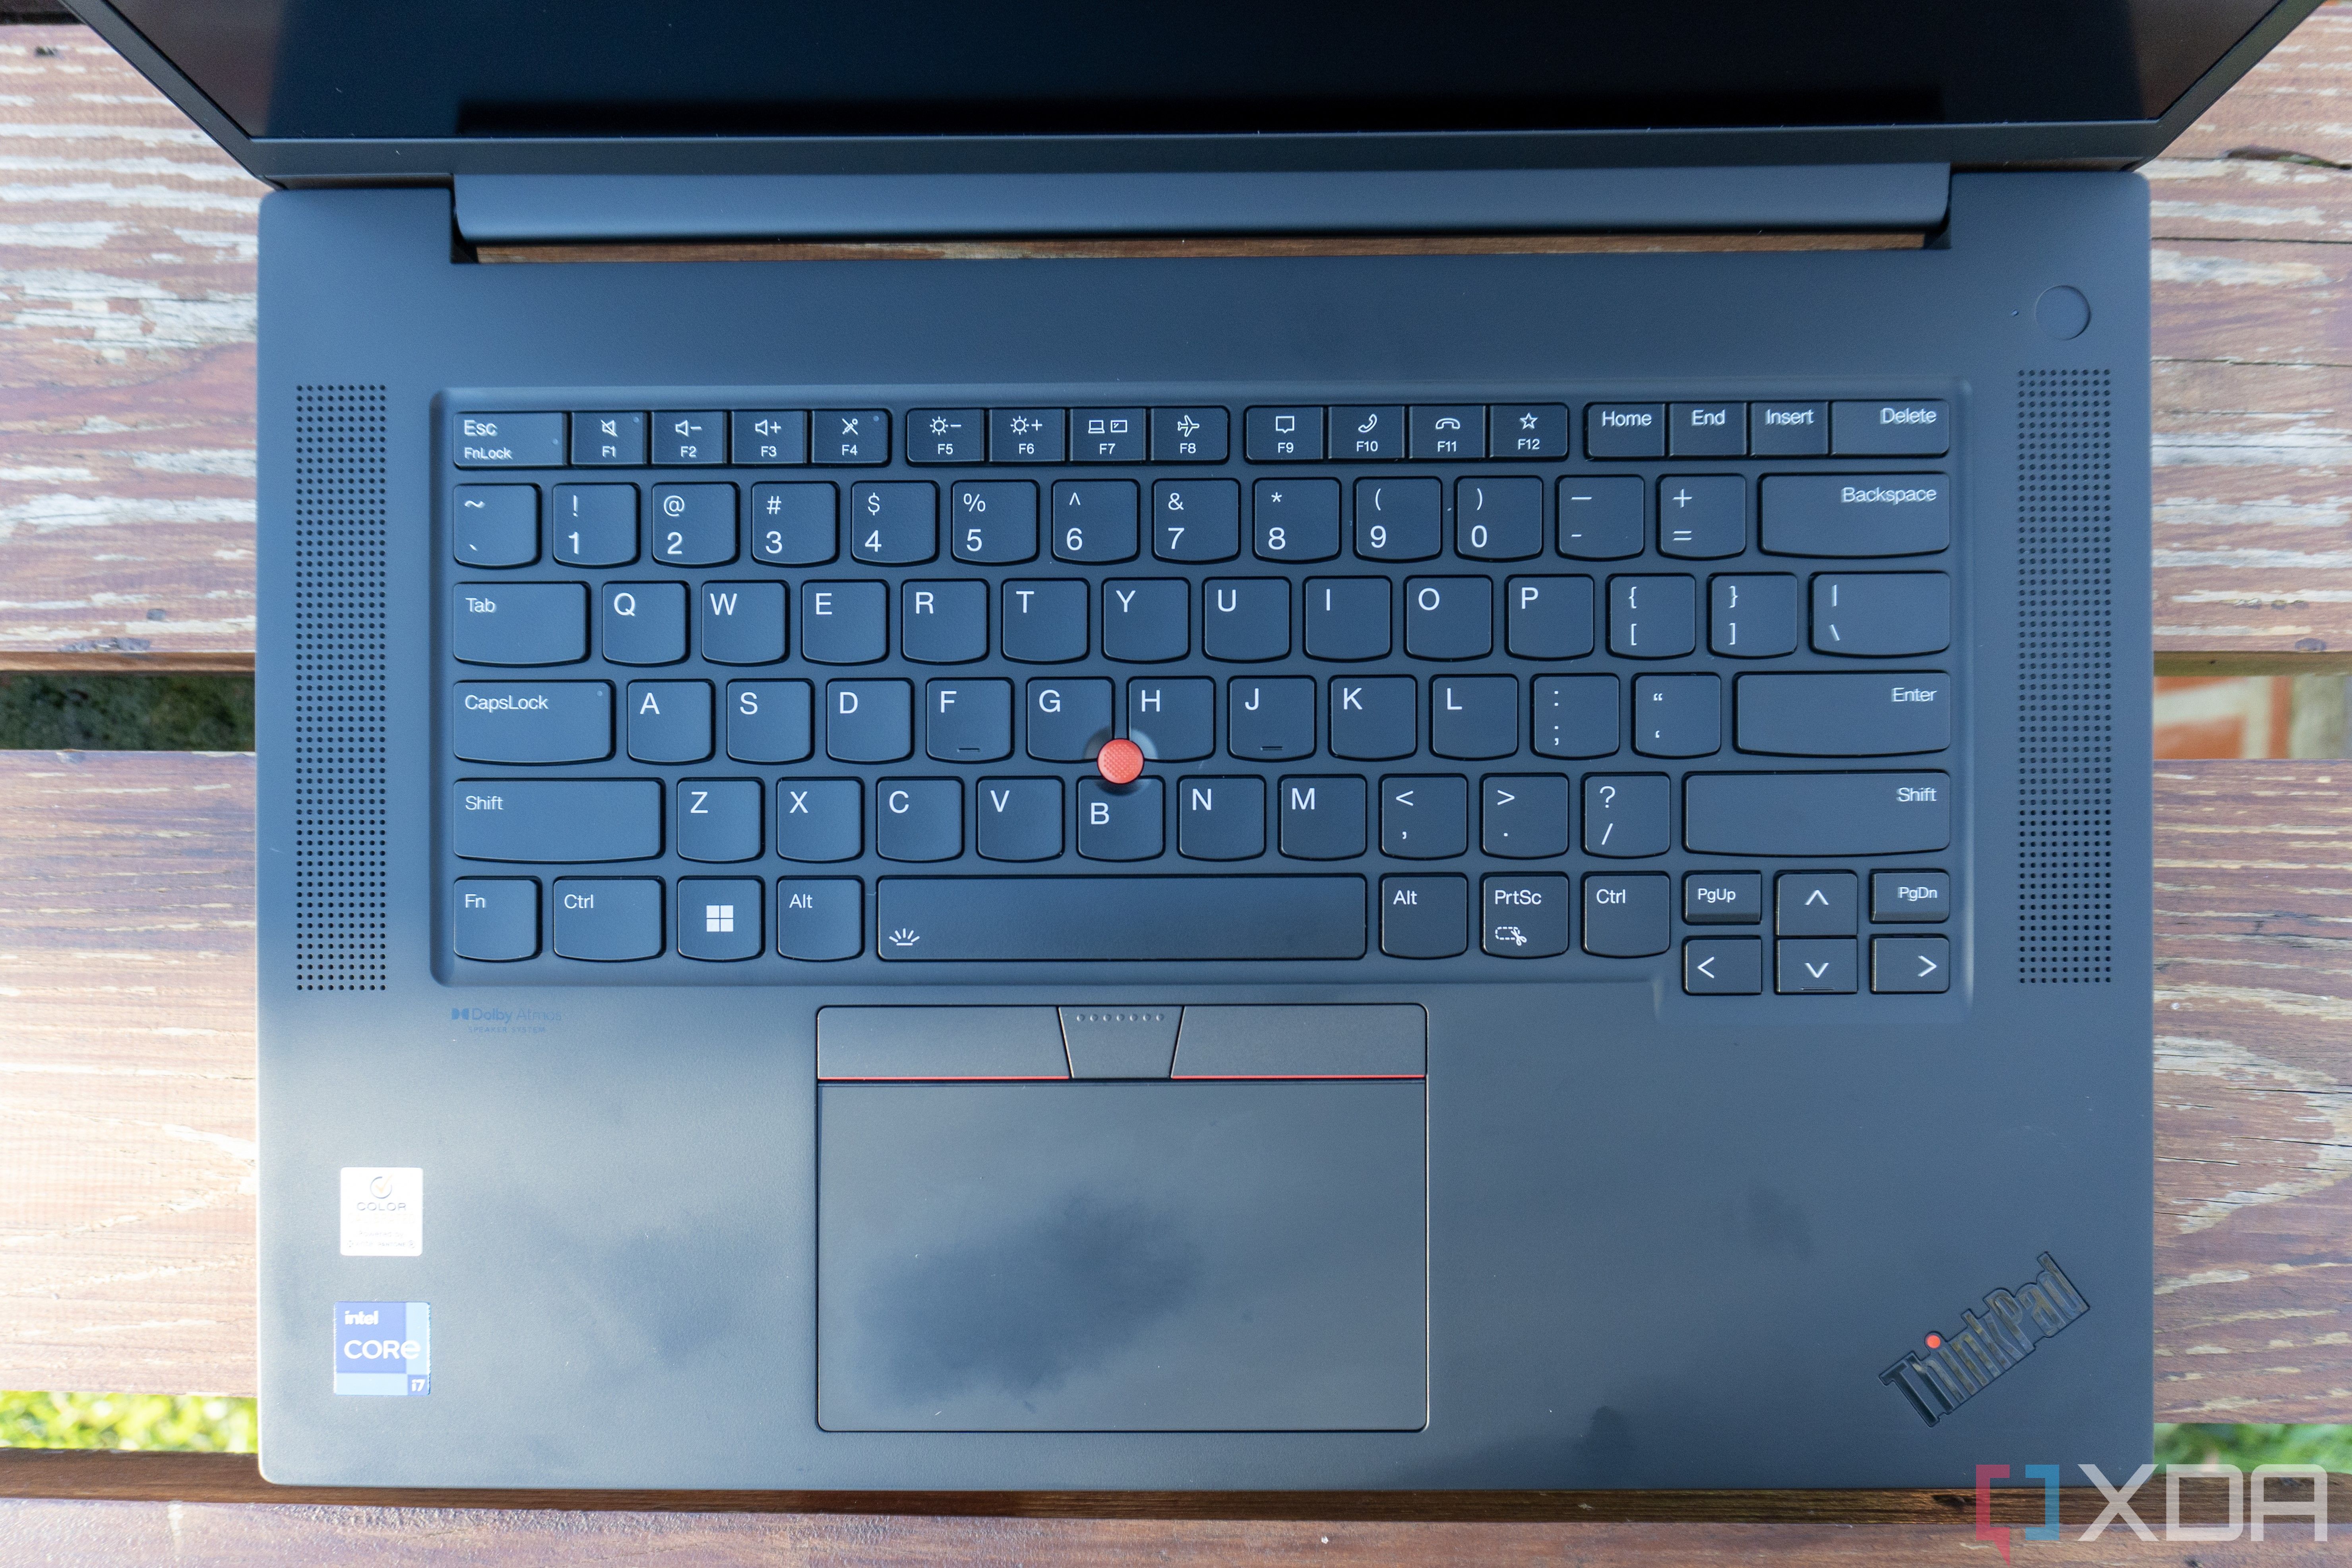 Overhead view of the keyboard and touchpad on the Lenovo ThinkPad X1 Extreme Gen 5 laptop